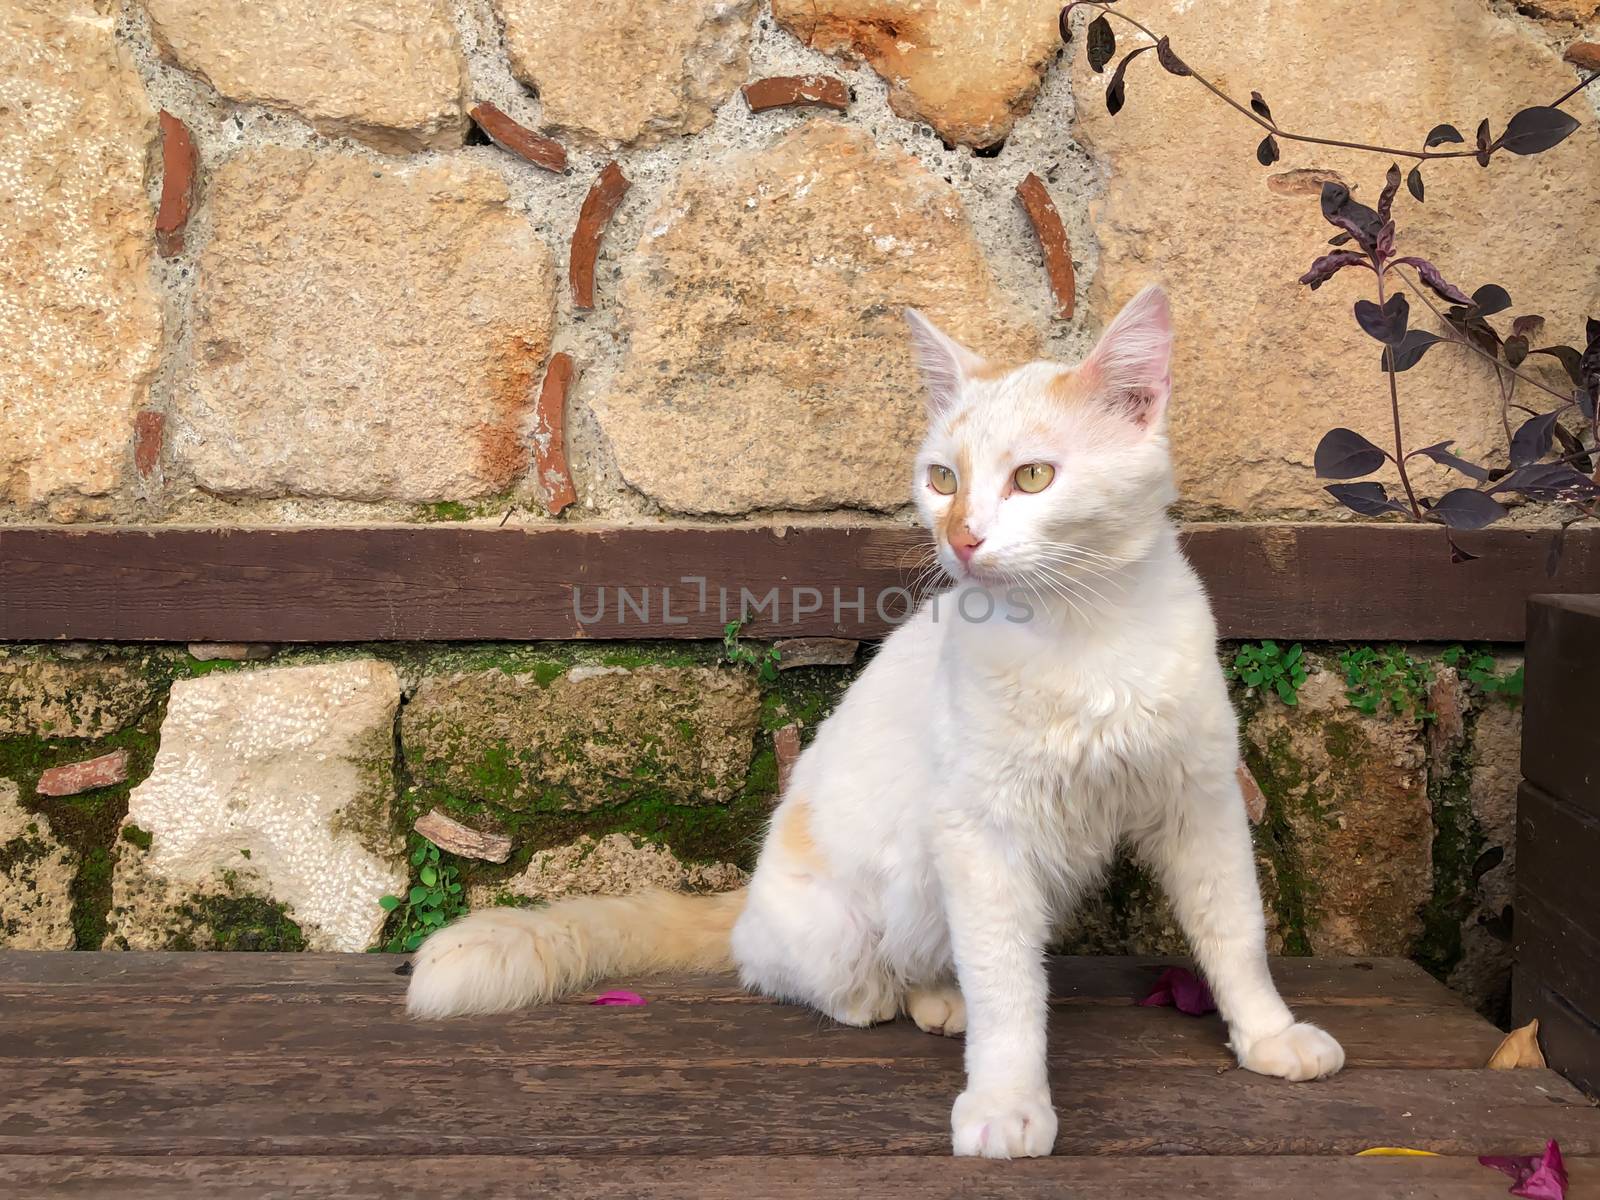 Close up white cat with green eyes sitting on bench in Antalya old town Kaleici with ancient stone wall background. Horizontal stock image